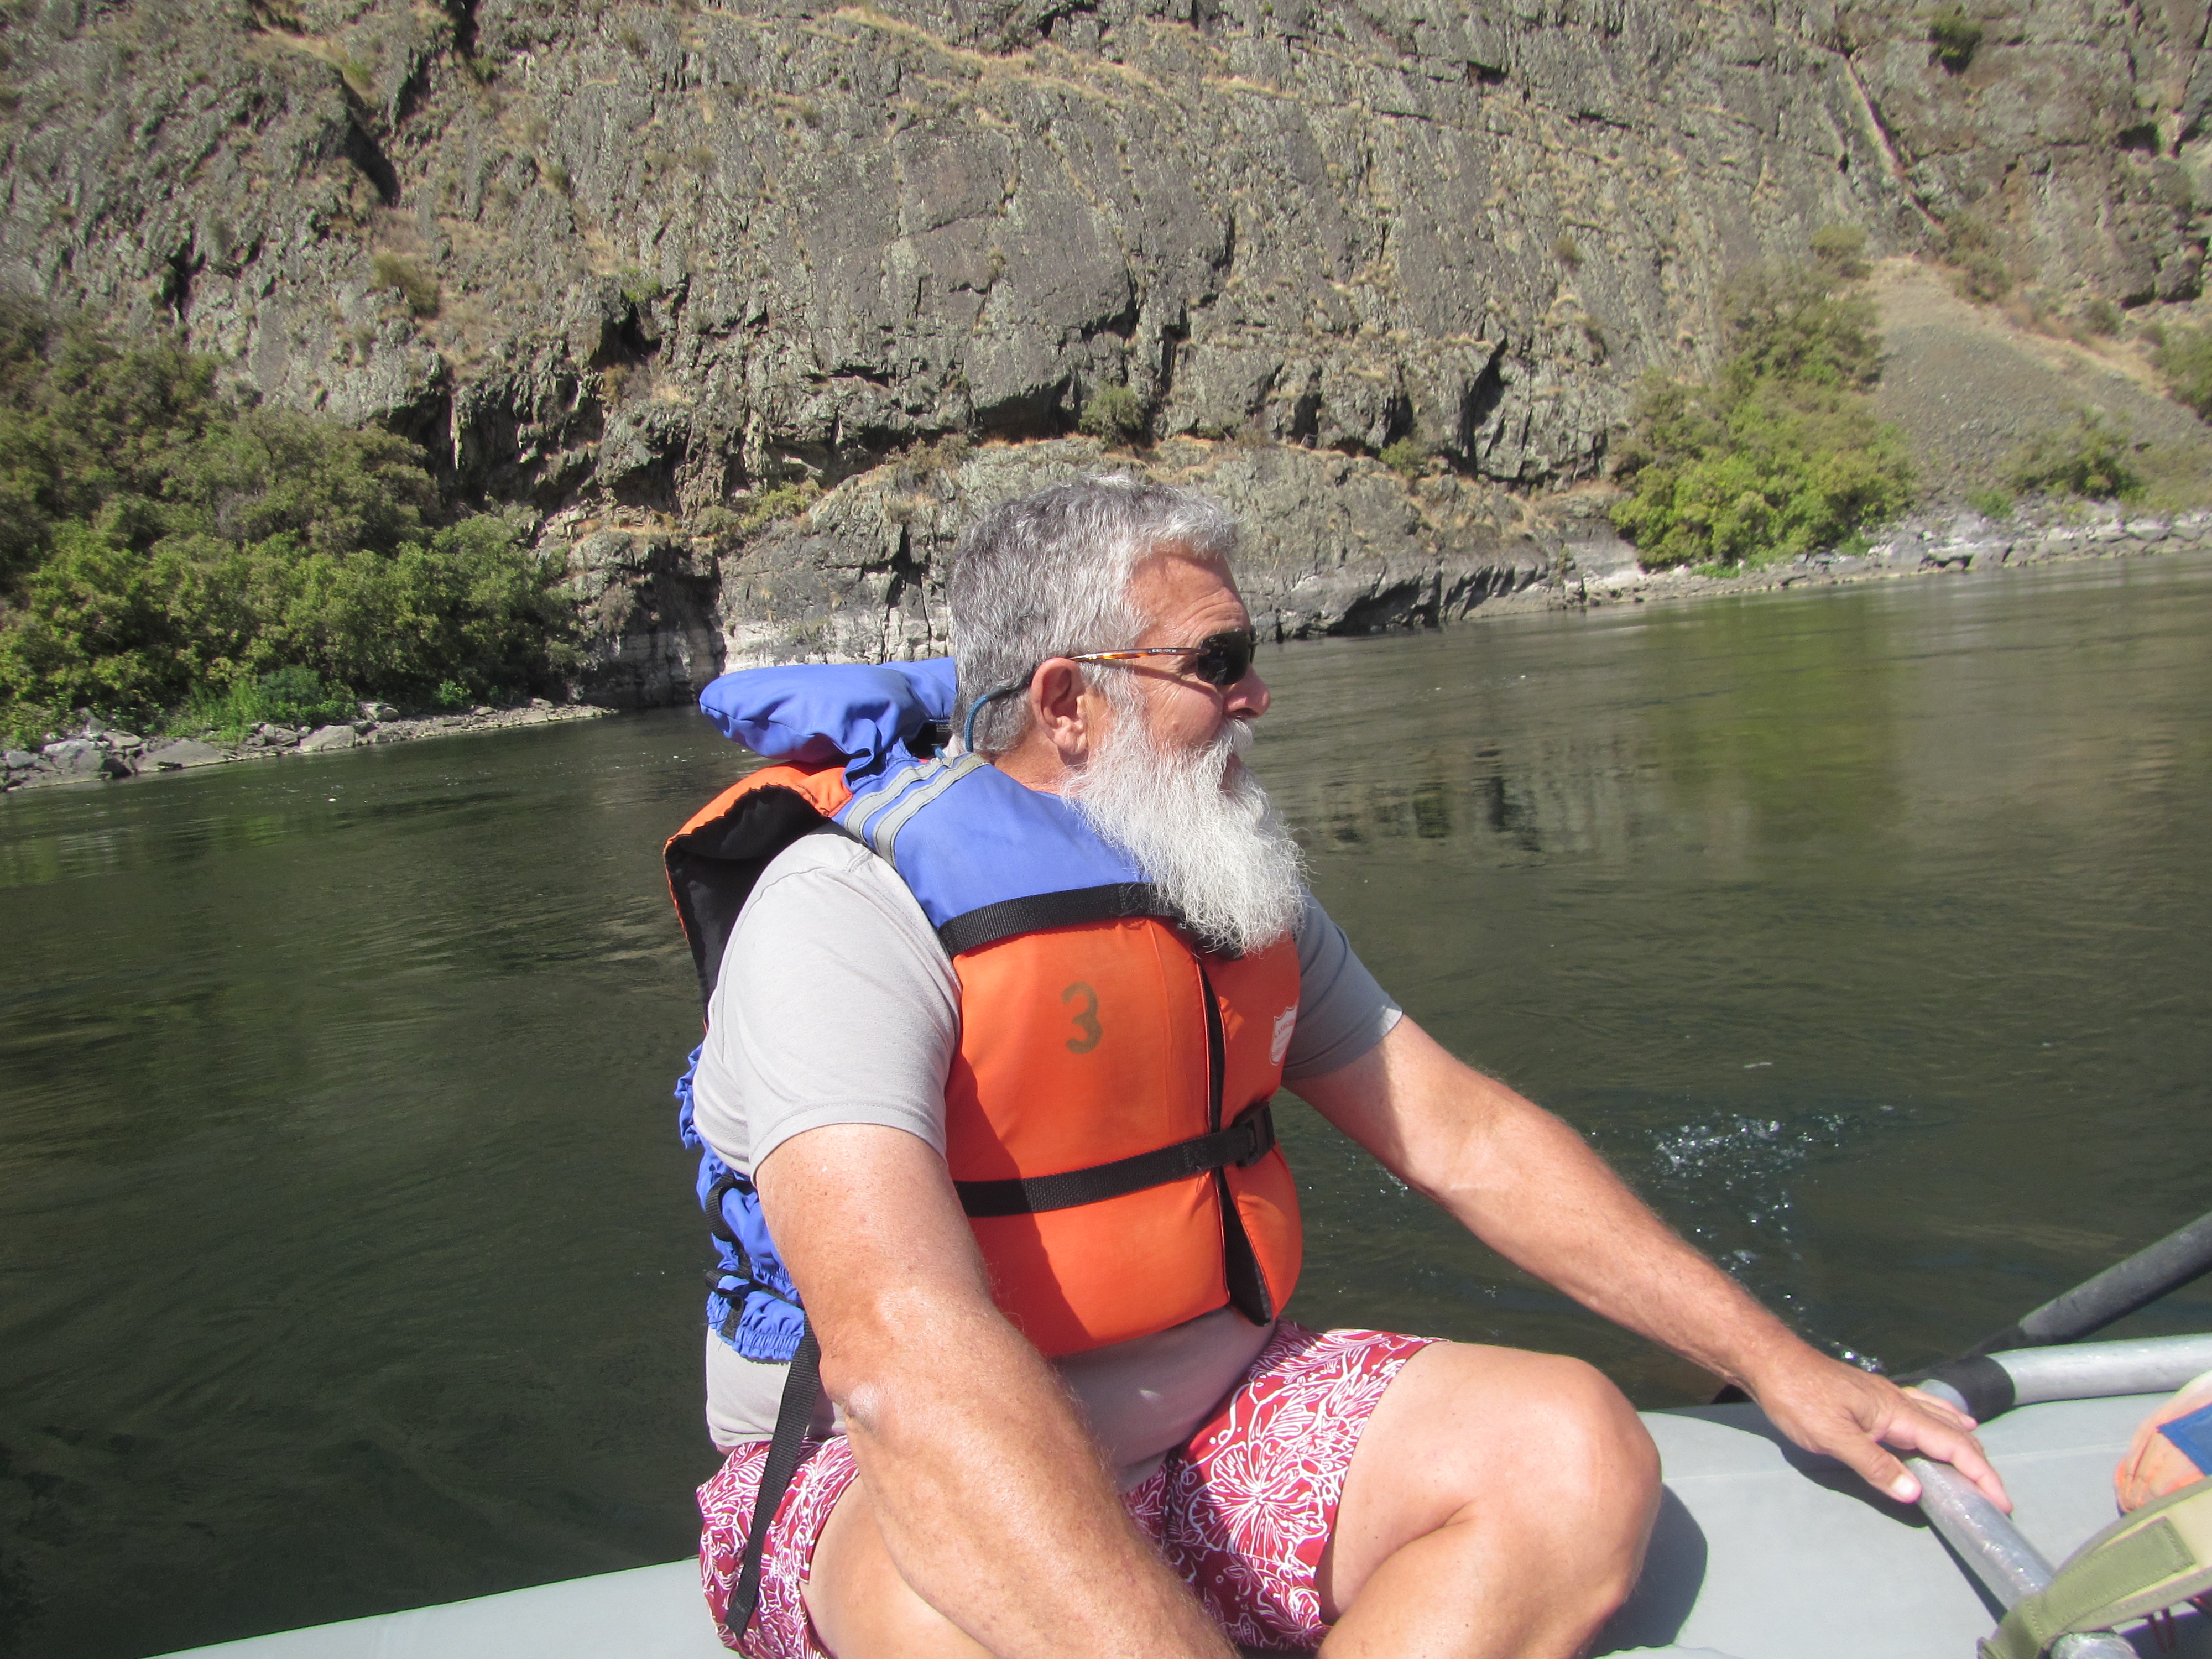 The Owner, Hells Canyon Adventures